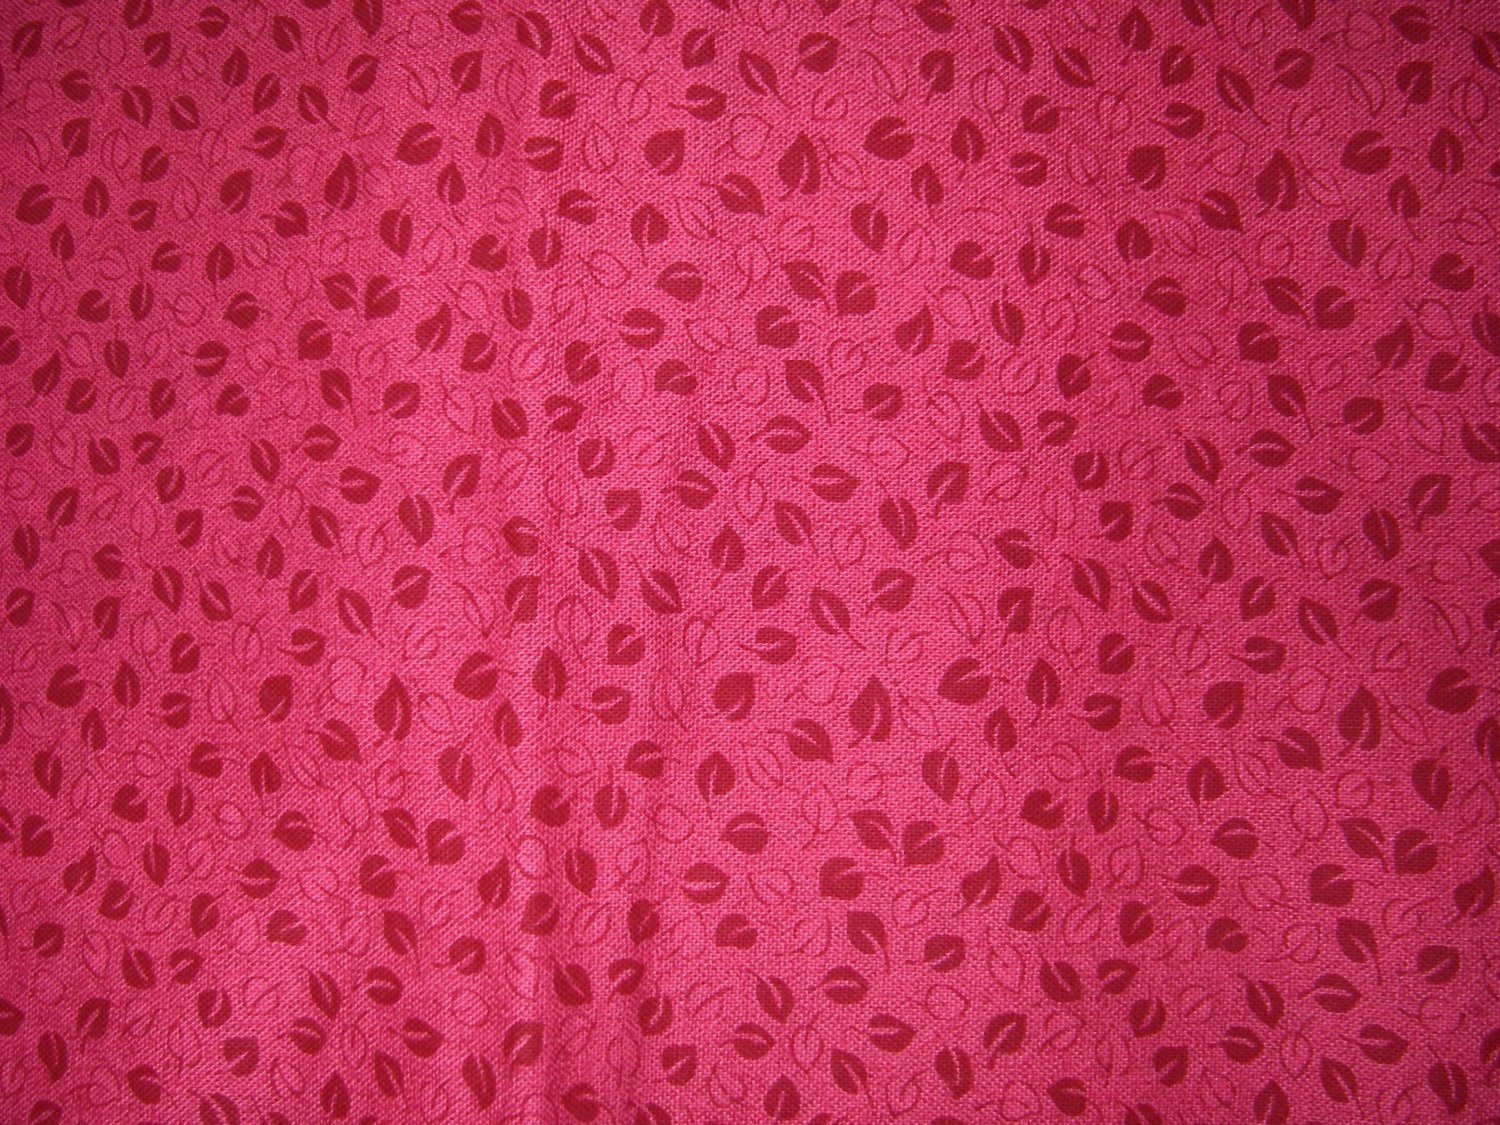 1.33 yards - Pink Red fabric with leaf design